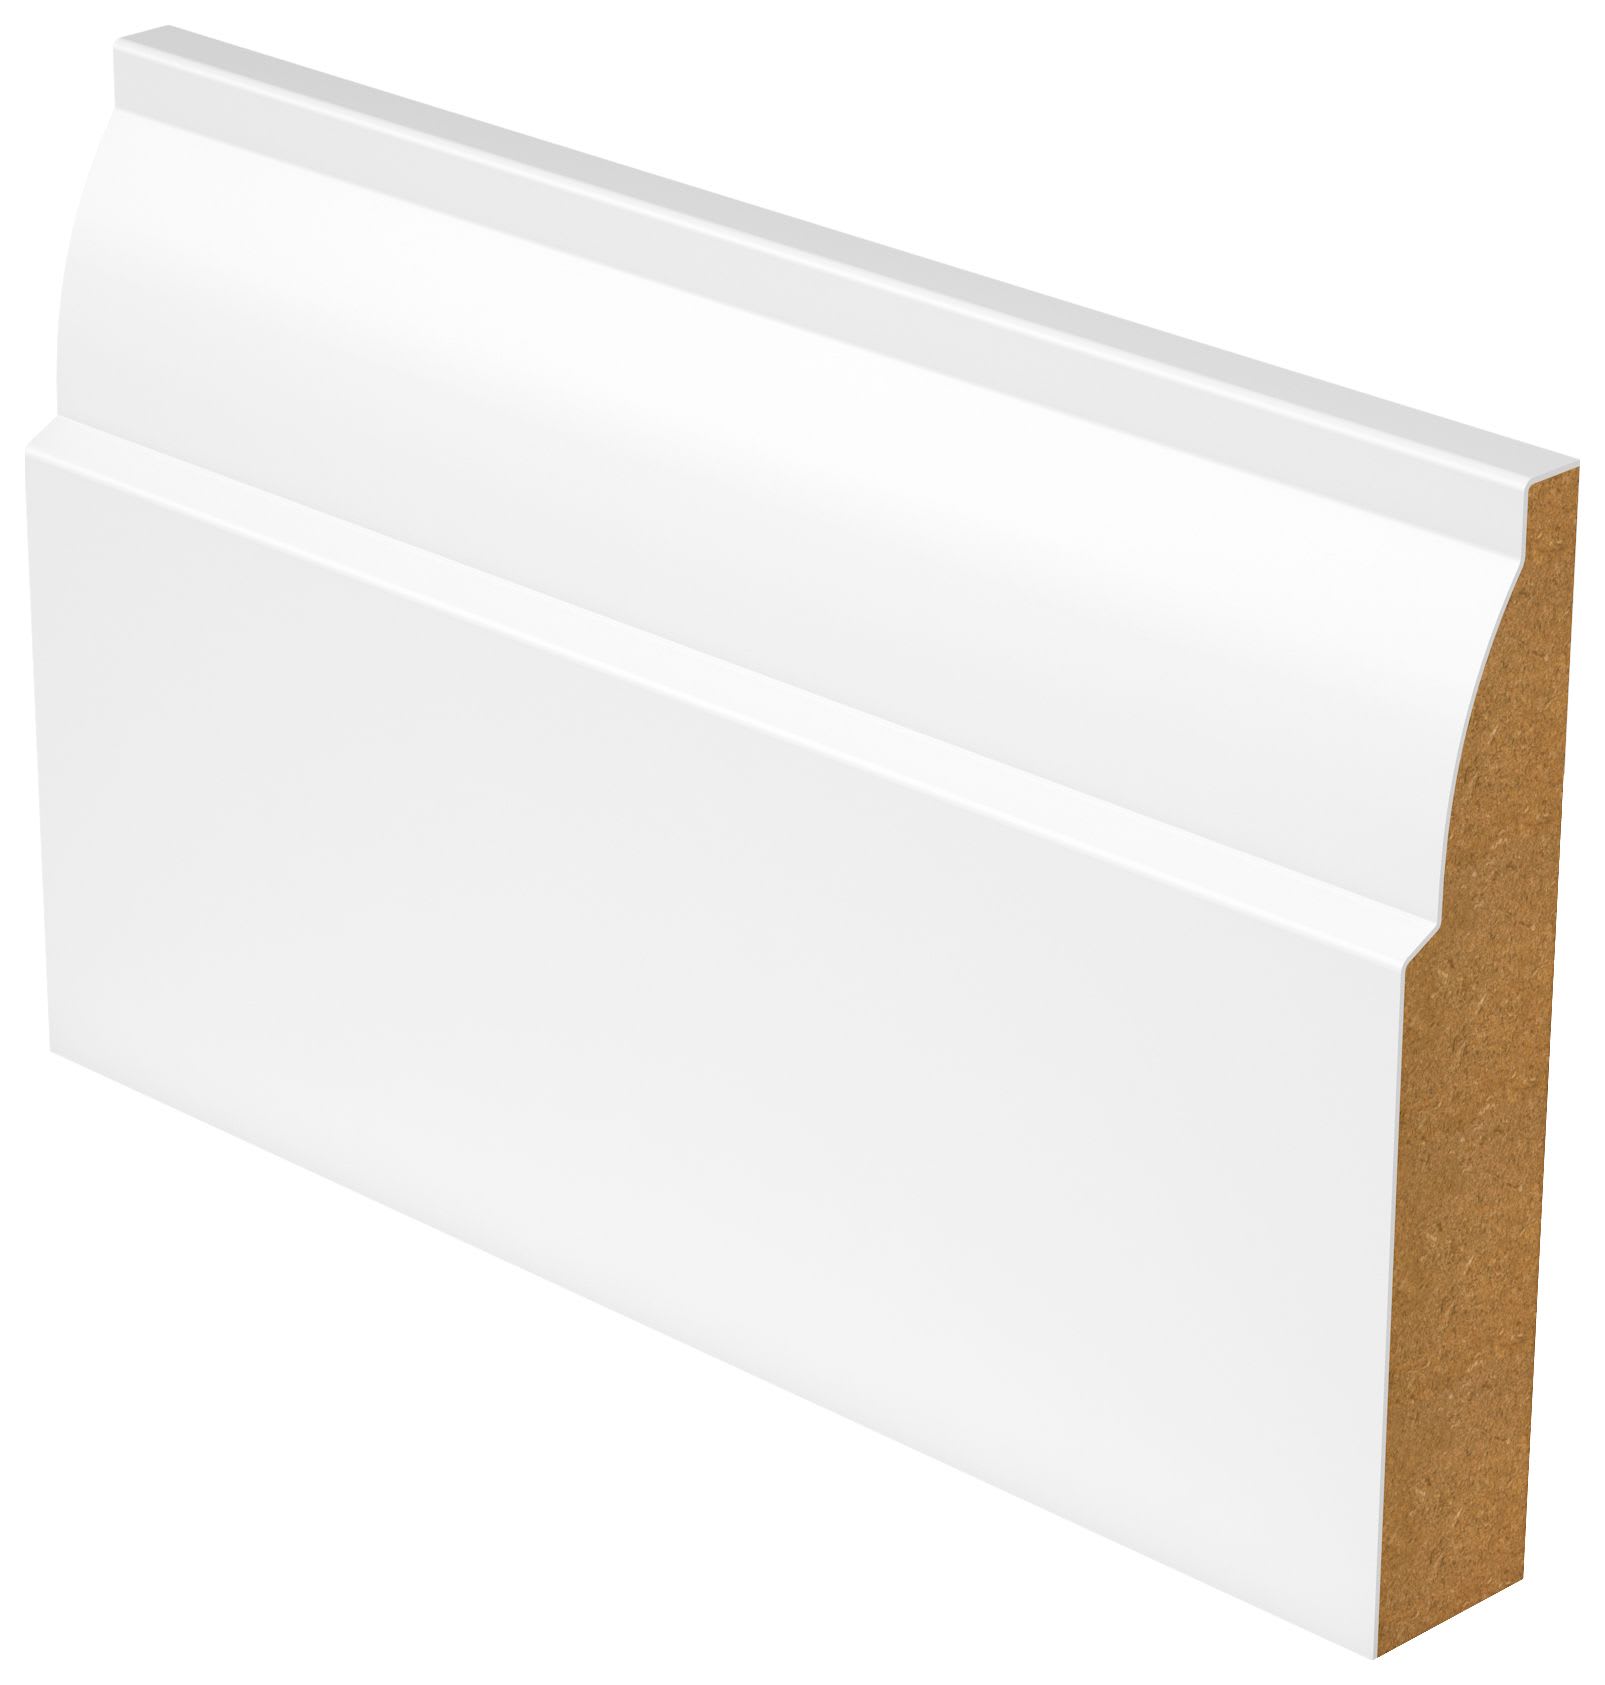 Ovolo White MDF Skirting - 18mm x 119mm